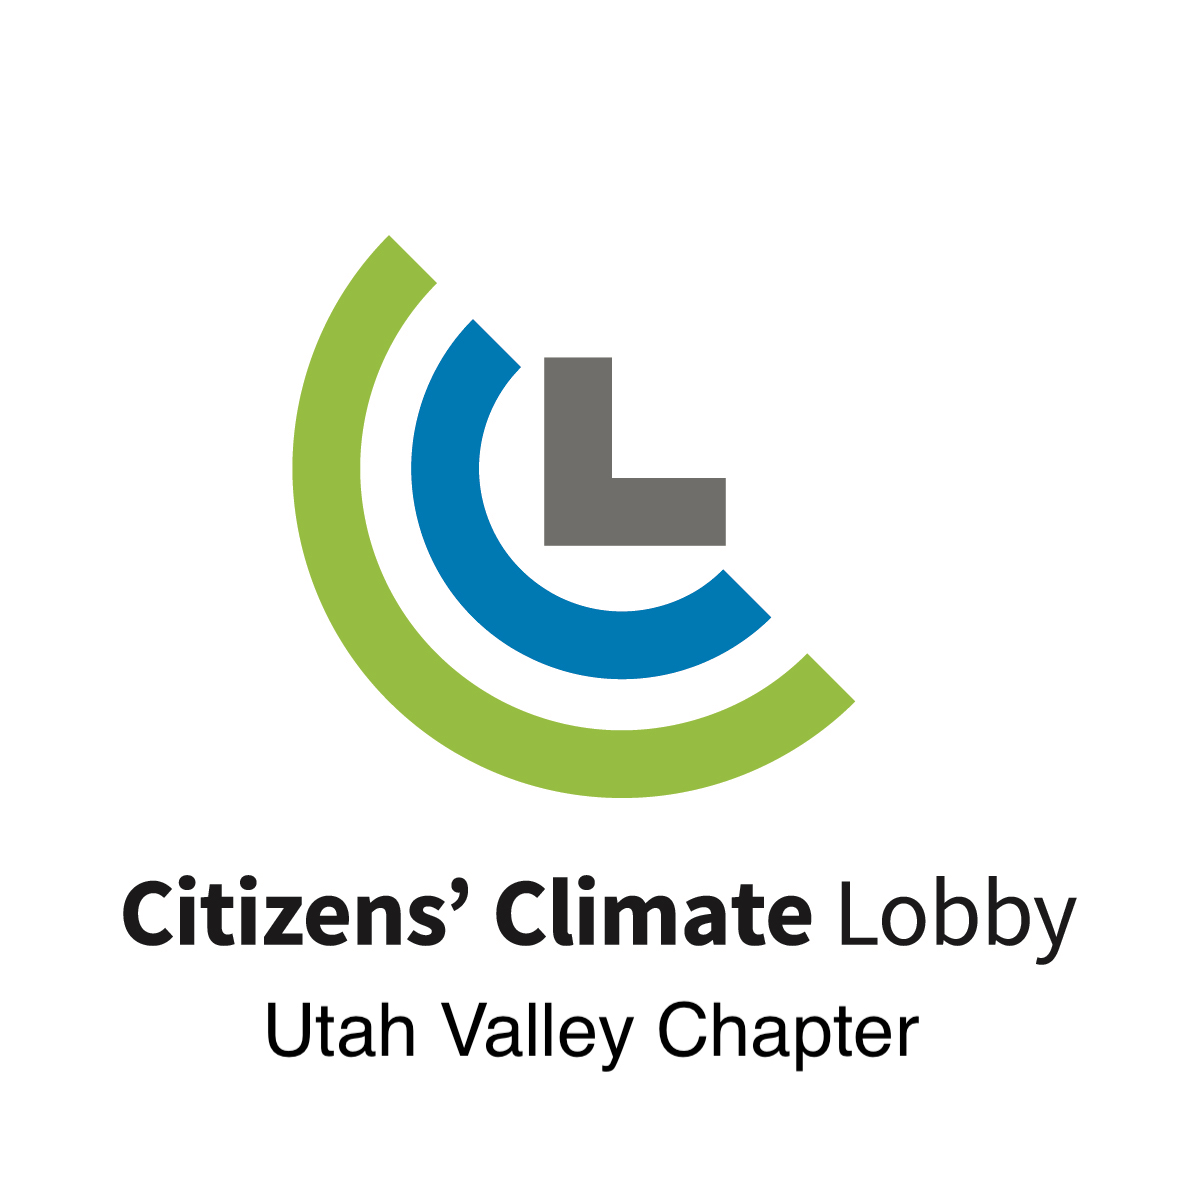 Citizens' Climate Lobby - Utah Valley Chapter